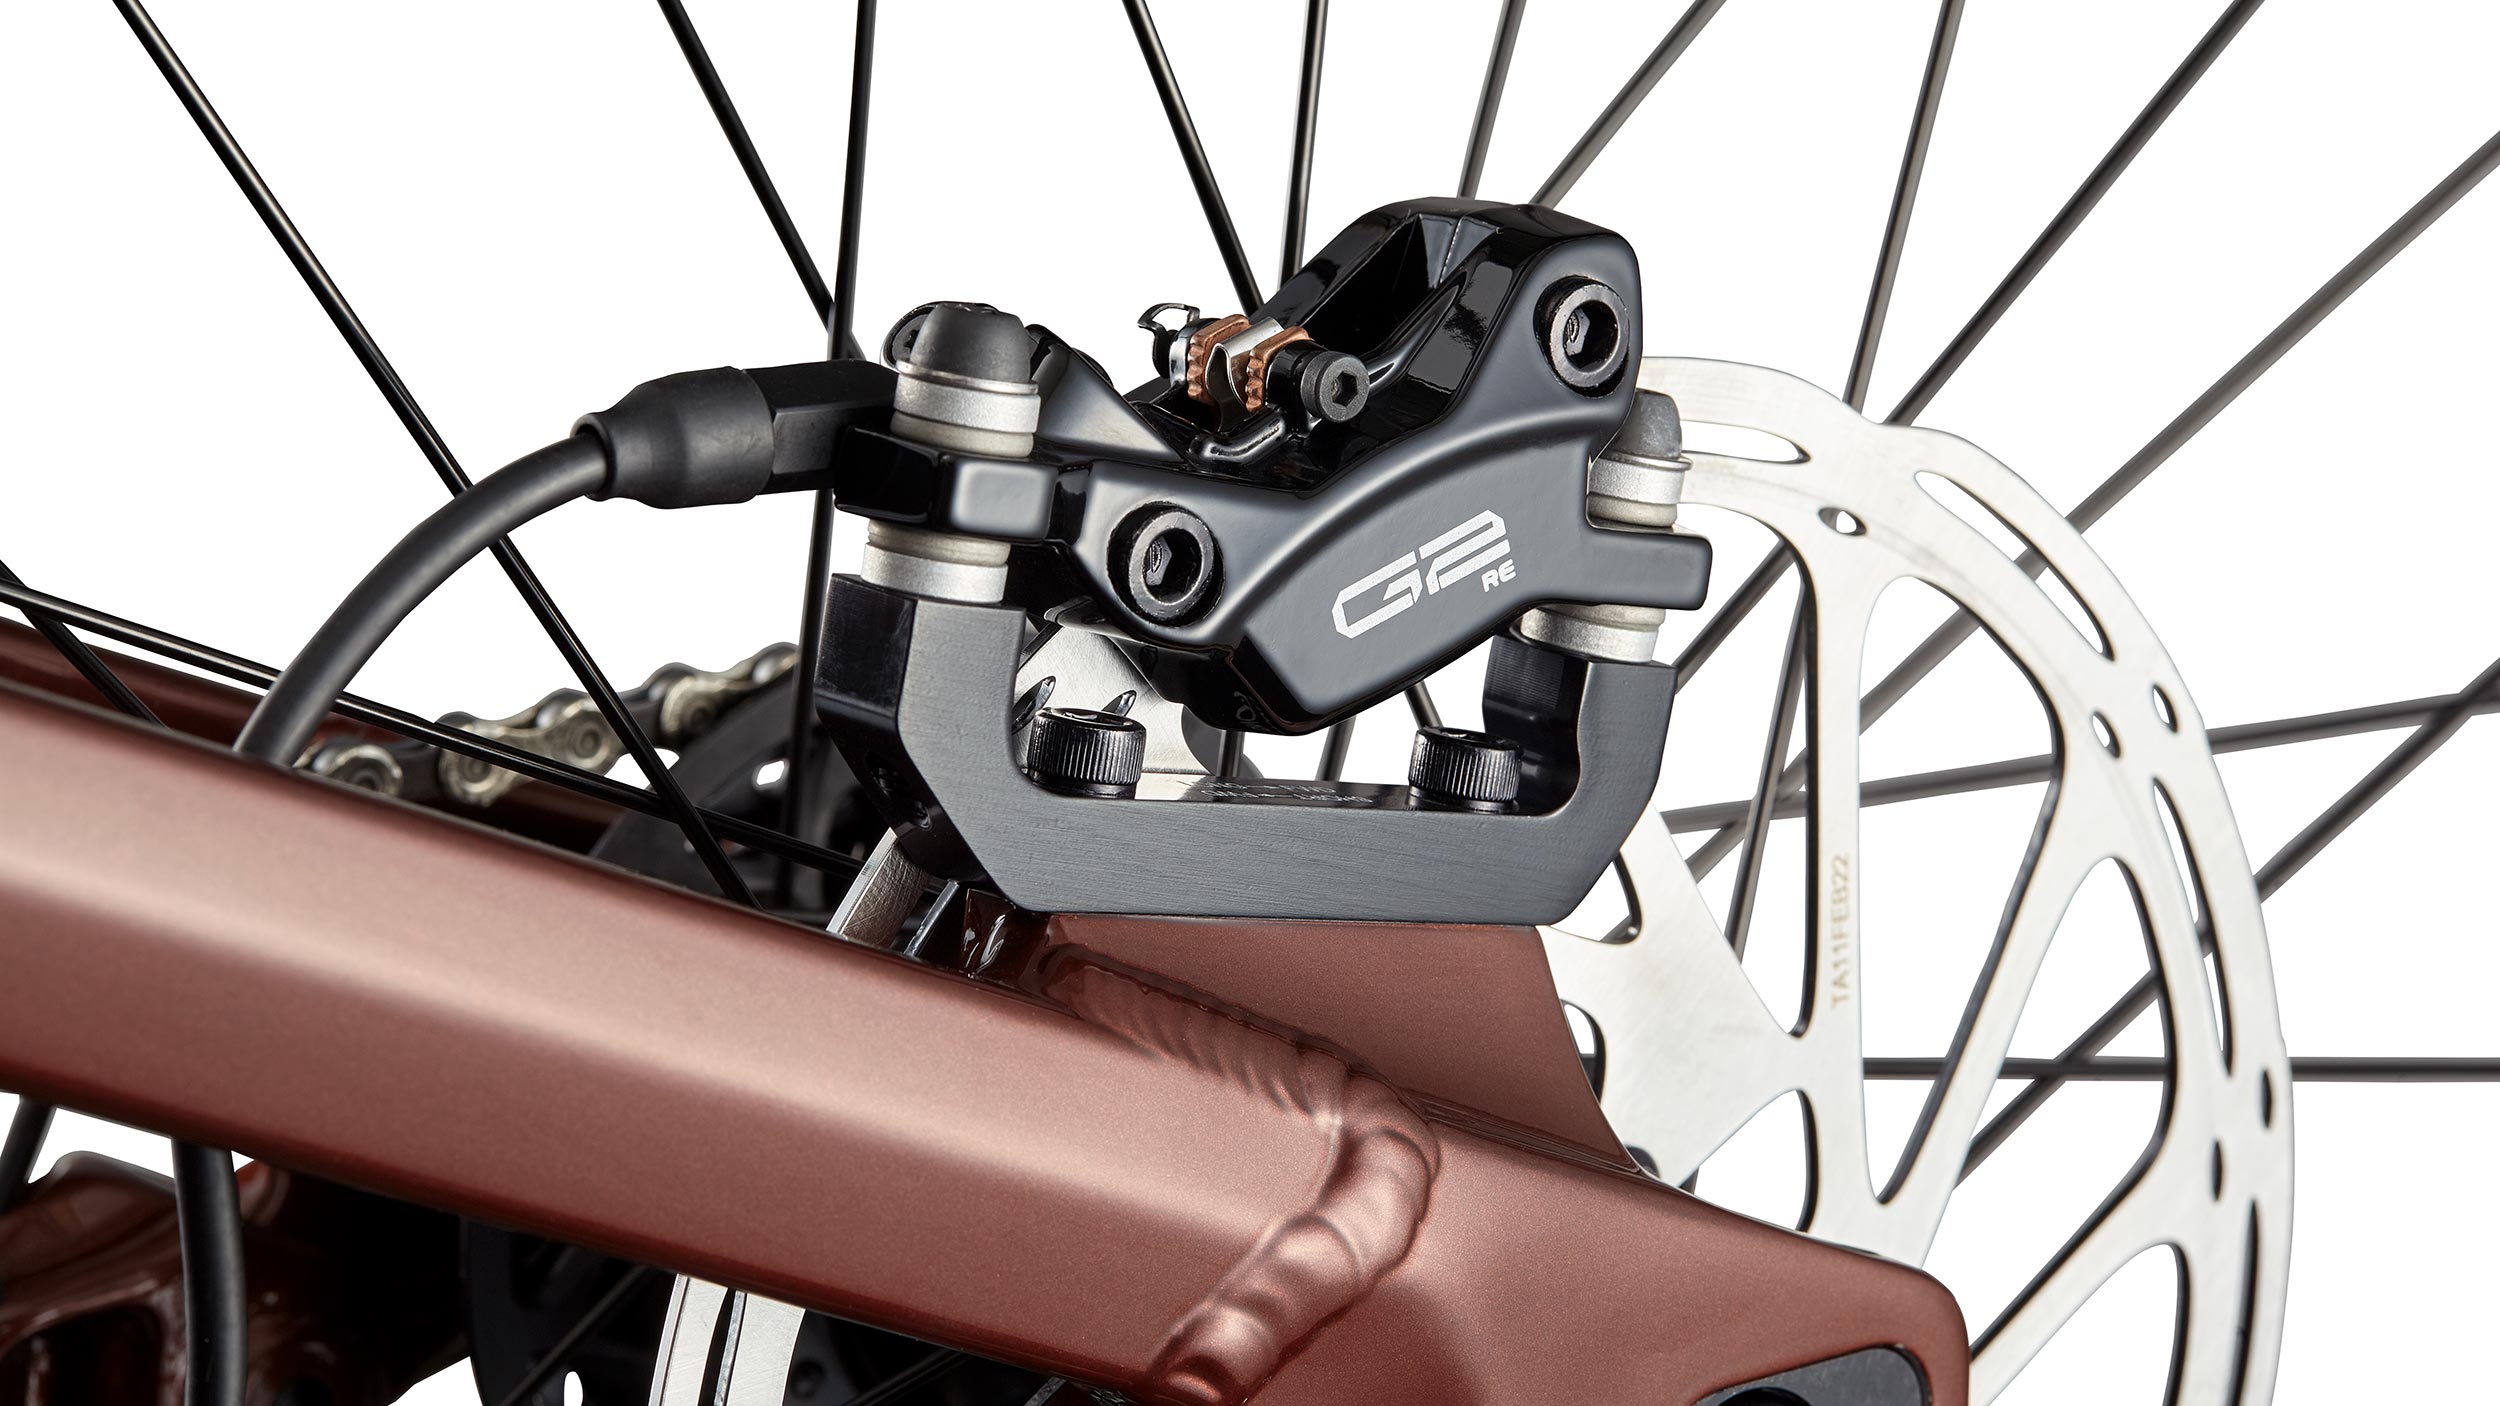 _caption_The SRAM Guide RE 4 Piston brakes offer reliable and powerful stopping performance. Designed with four pistons, they deliver consistent braking force and excellent modulation, providing enhanced control and confidence on the trails.